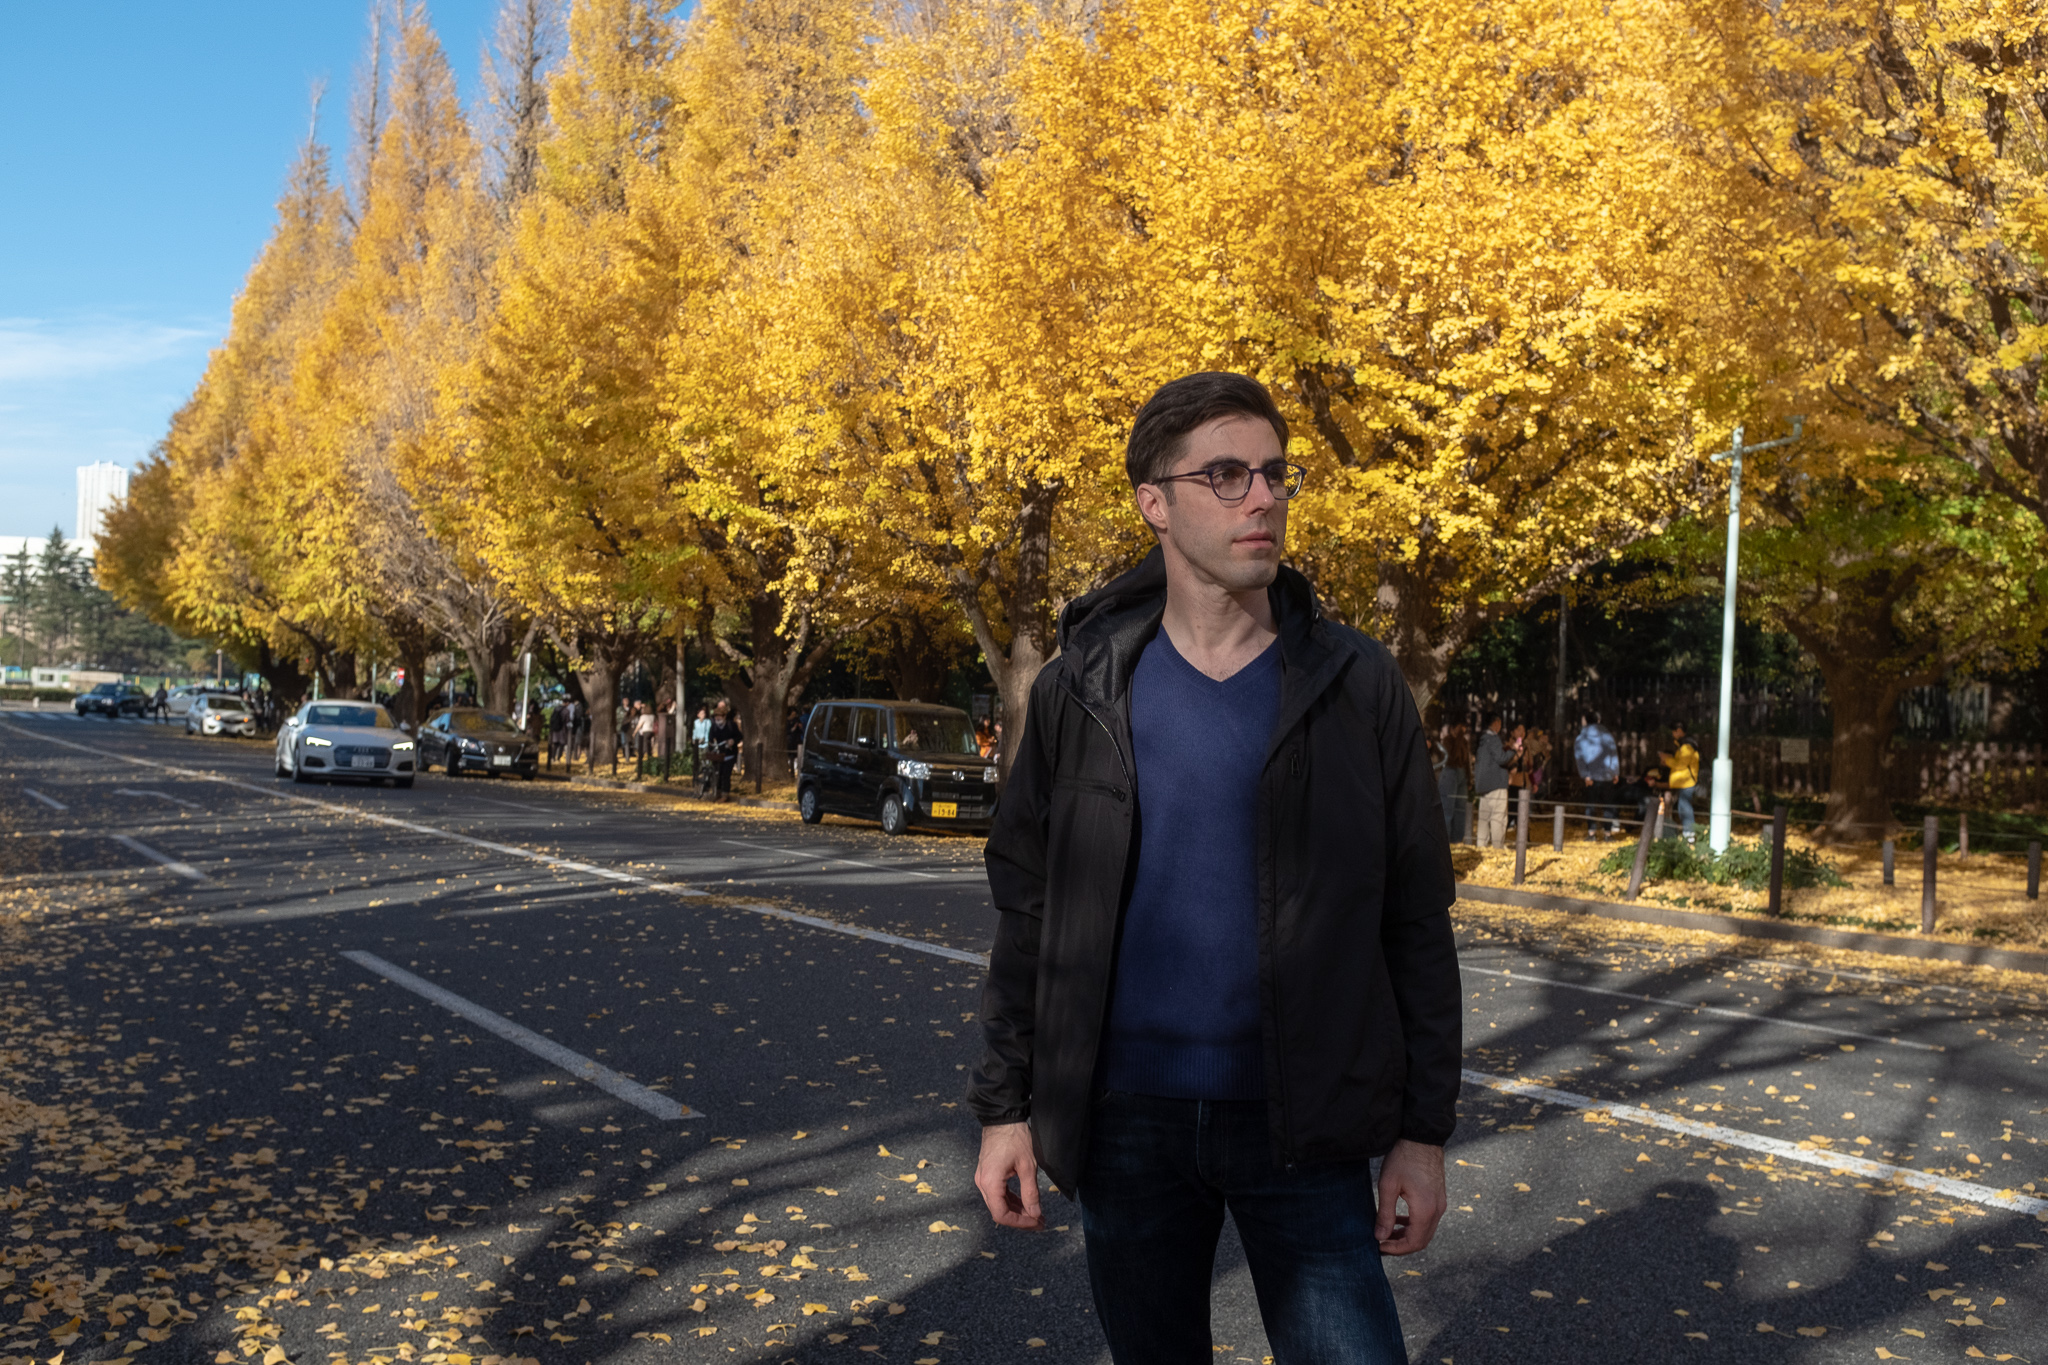 Josh wearing Baubax jacket with bright yellow leaves on trees in the background